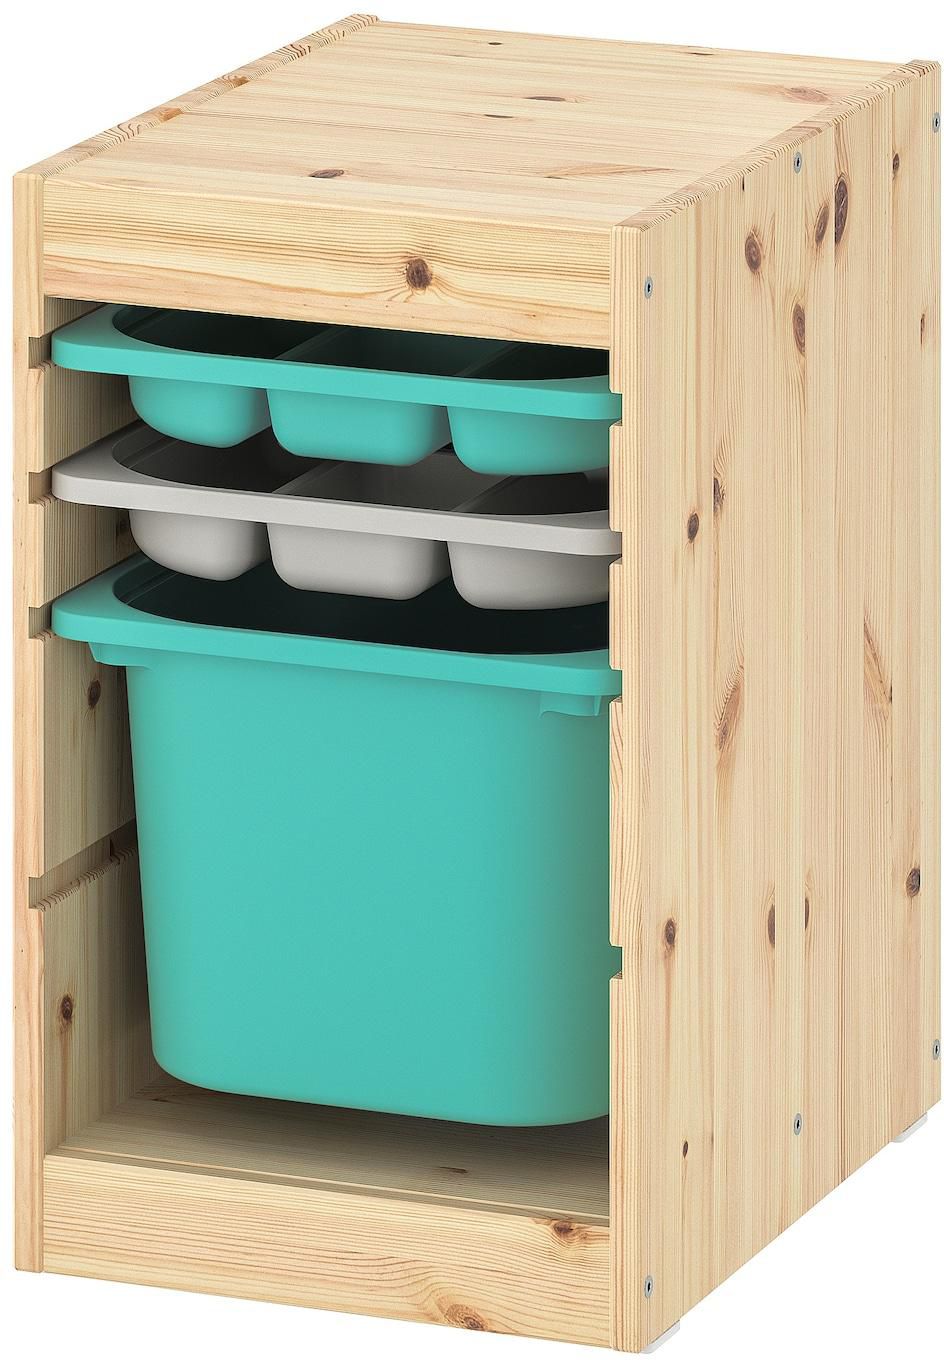 TROFAST Storage combination with box/trays - light white stained pine turquoise/grey 32x44x52 cm